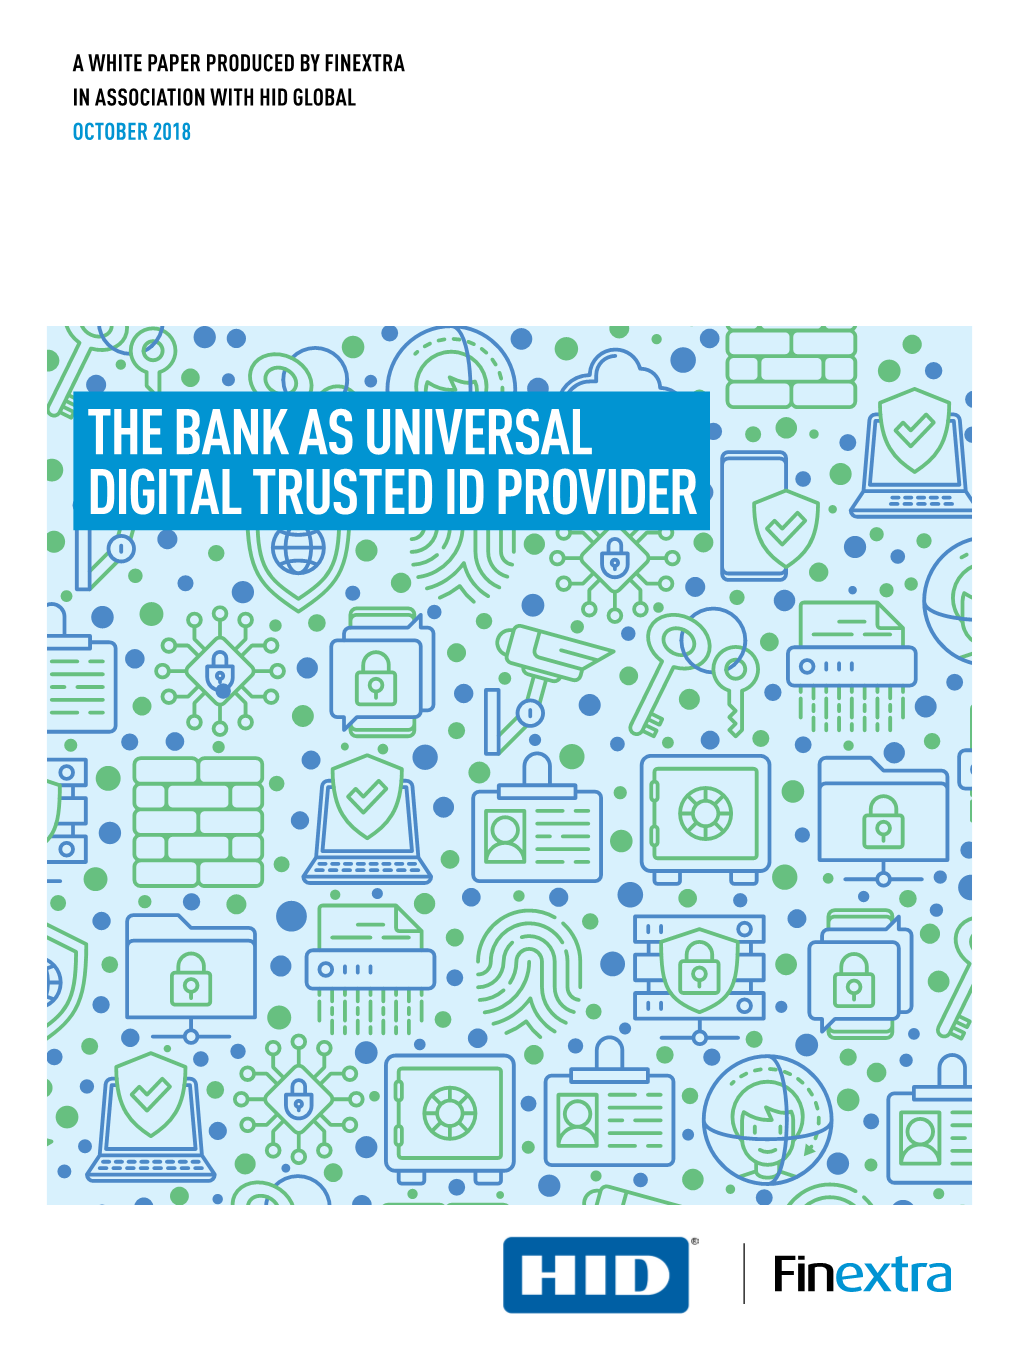 THE BANK AS UNIVERSAL DIGITAL TRUSTED ID PROVIDER 01 Introduction